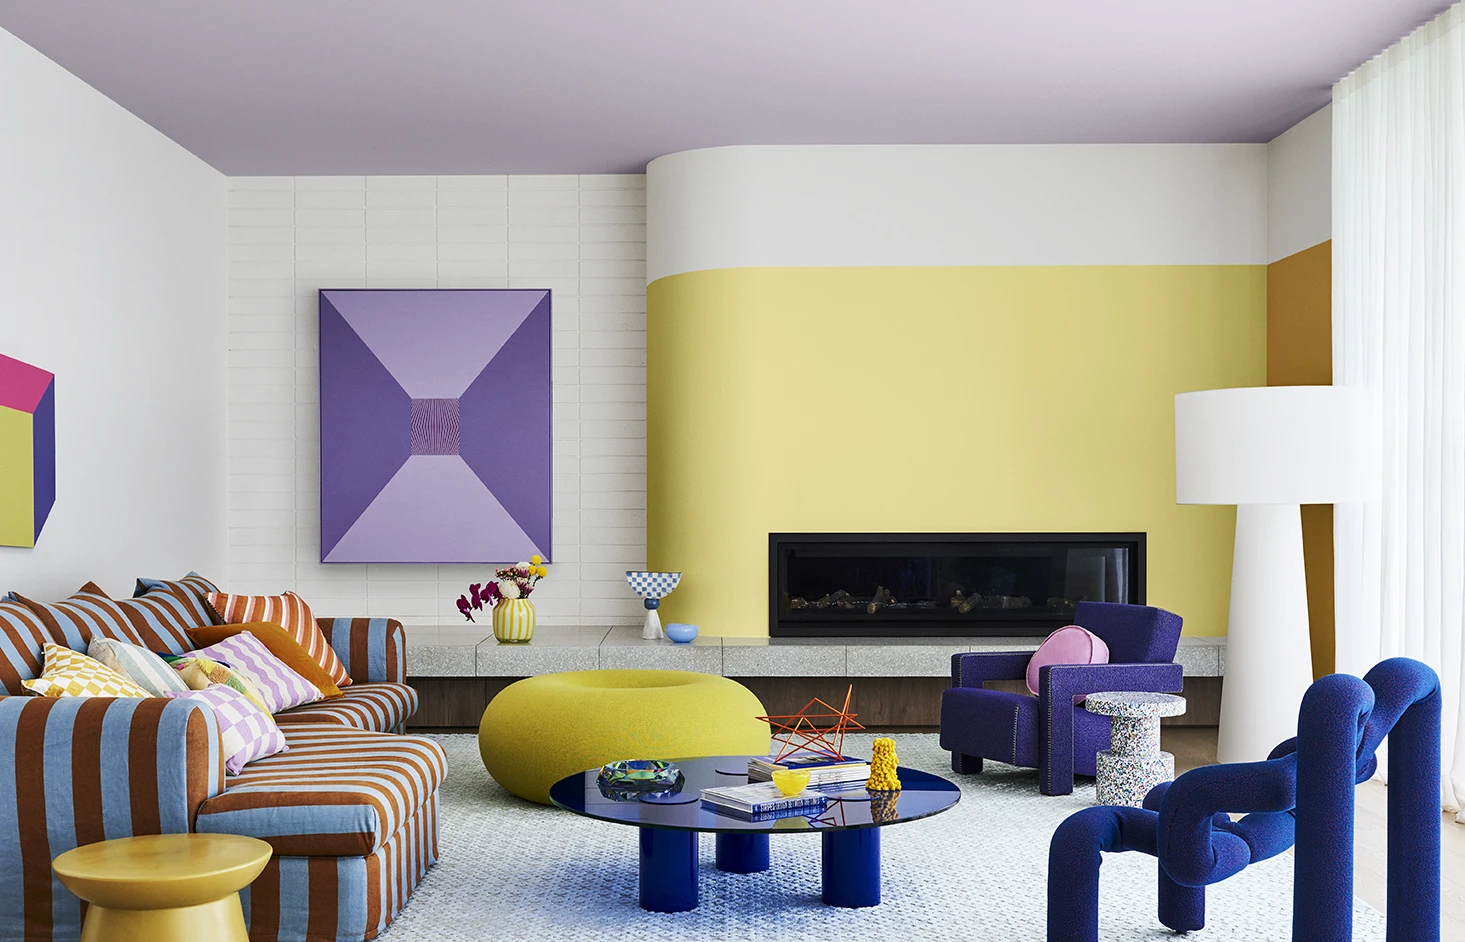 White and yellow living room with purple ceiling and brightly coloured furniture